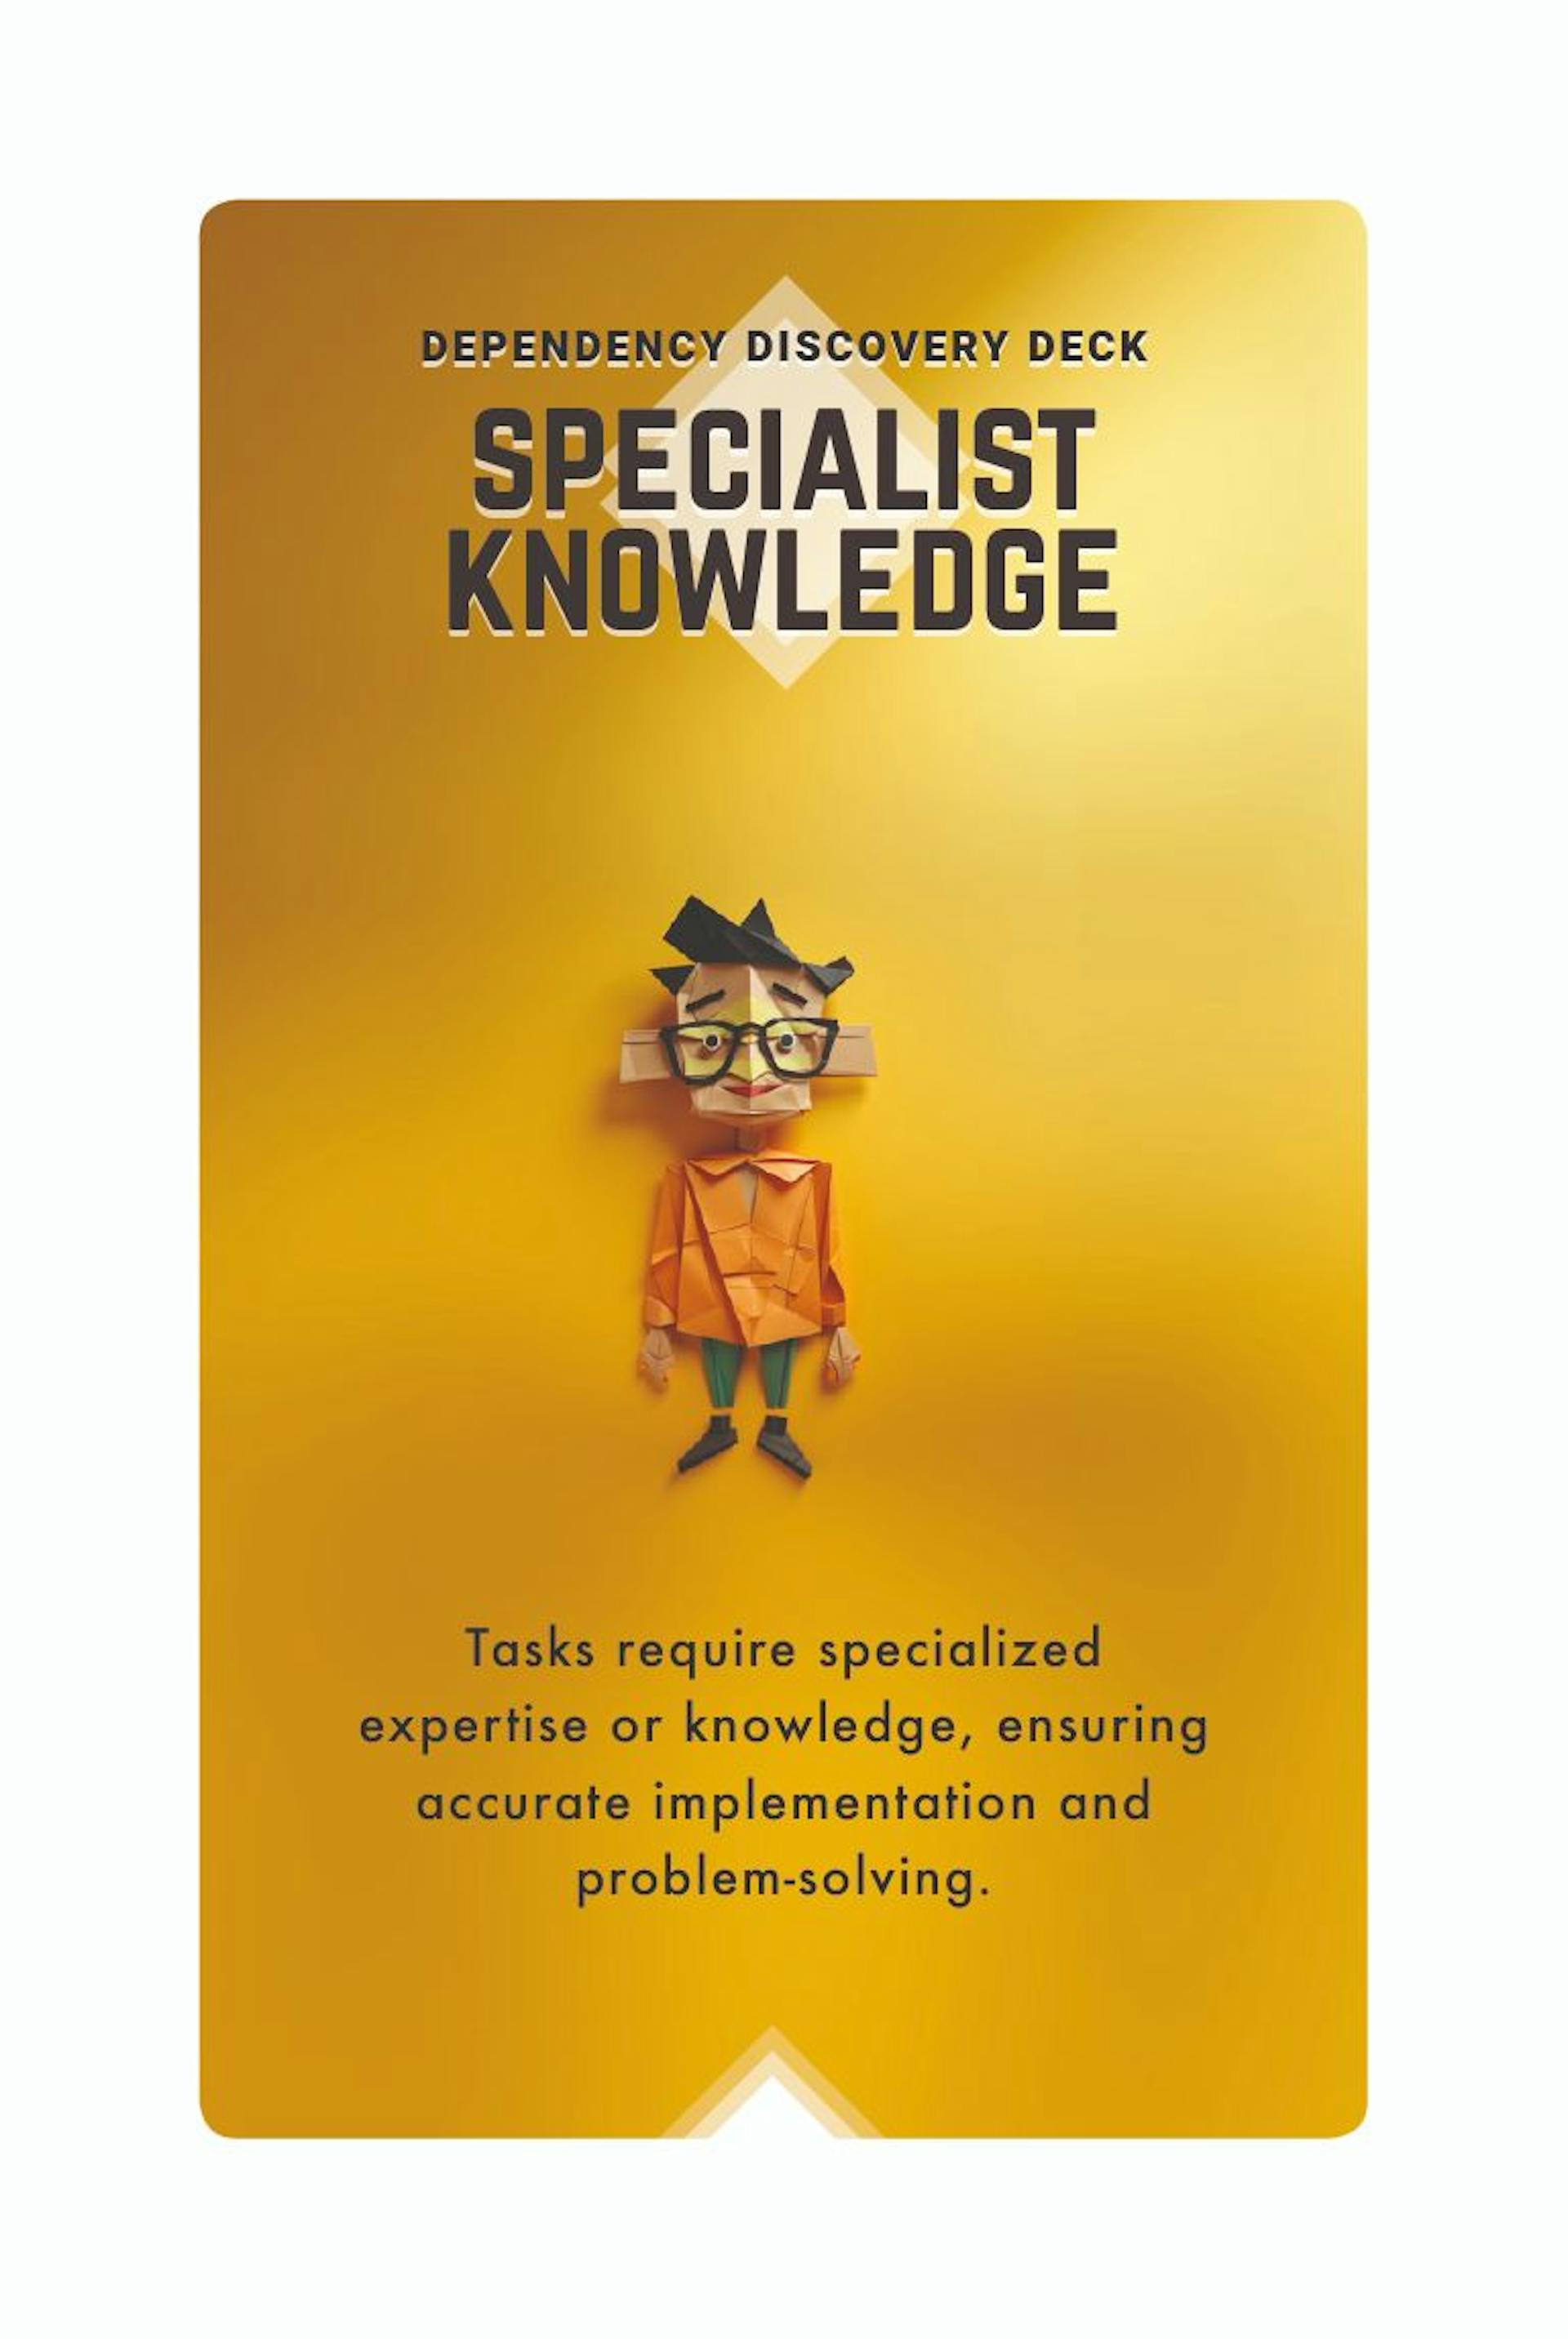 Card for Specialist Knowledge